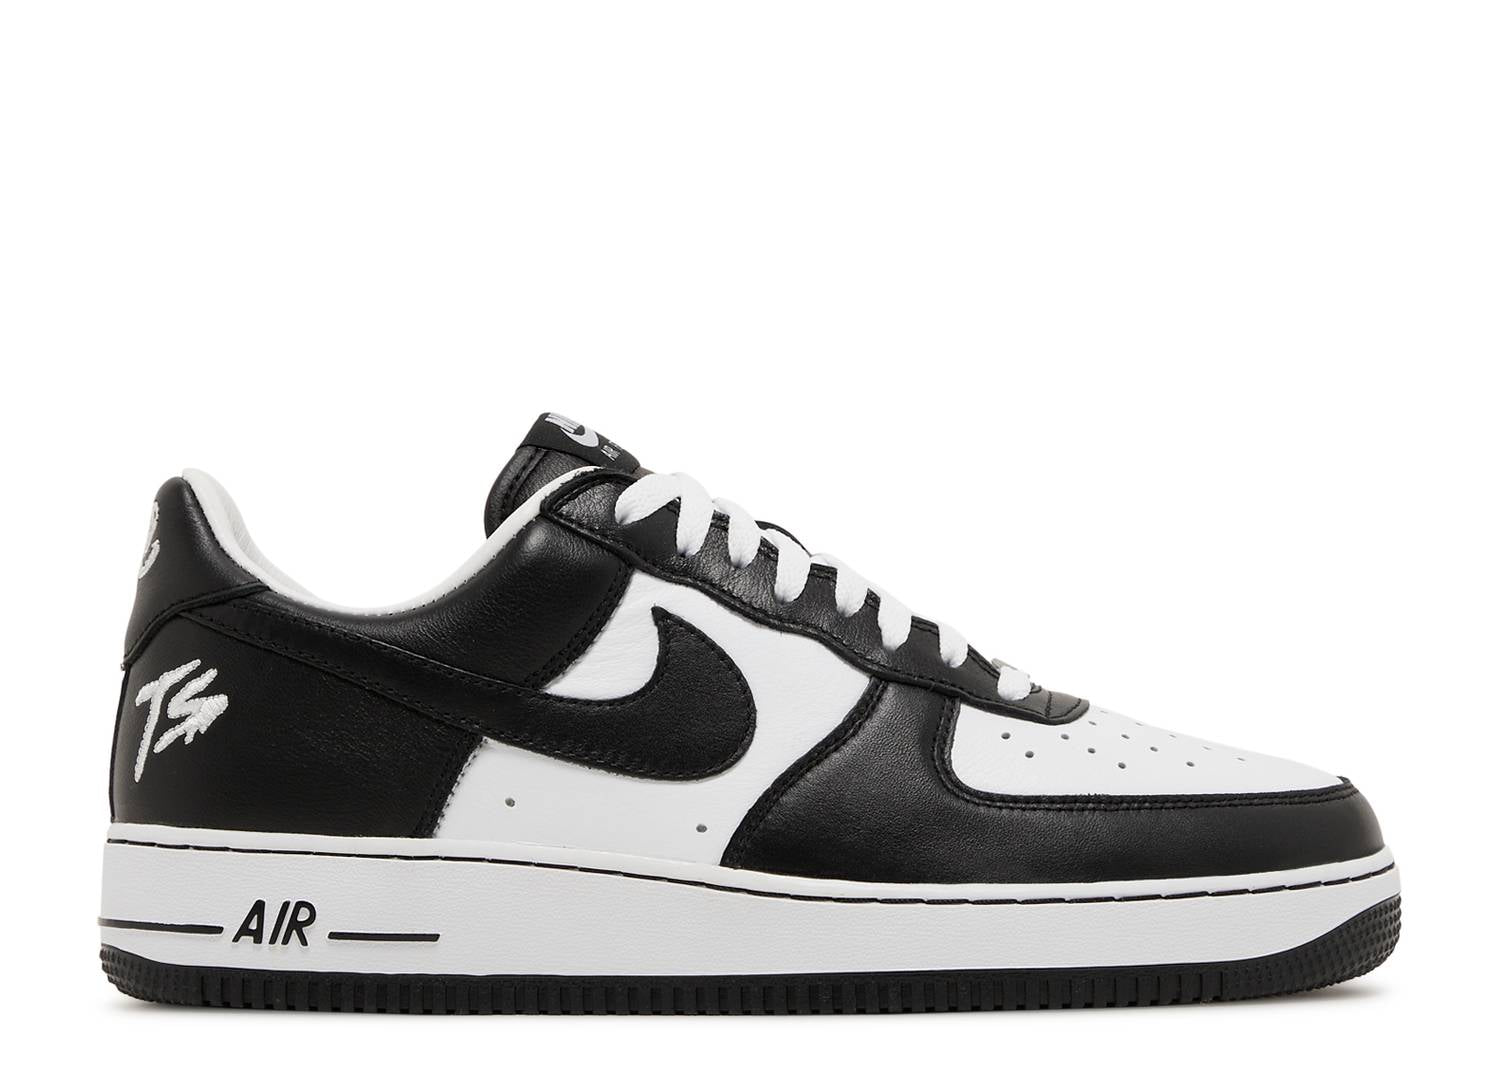 NIKE AIR FORCE 1 LOW X TERROR SQUAD “BLACKOUT”